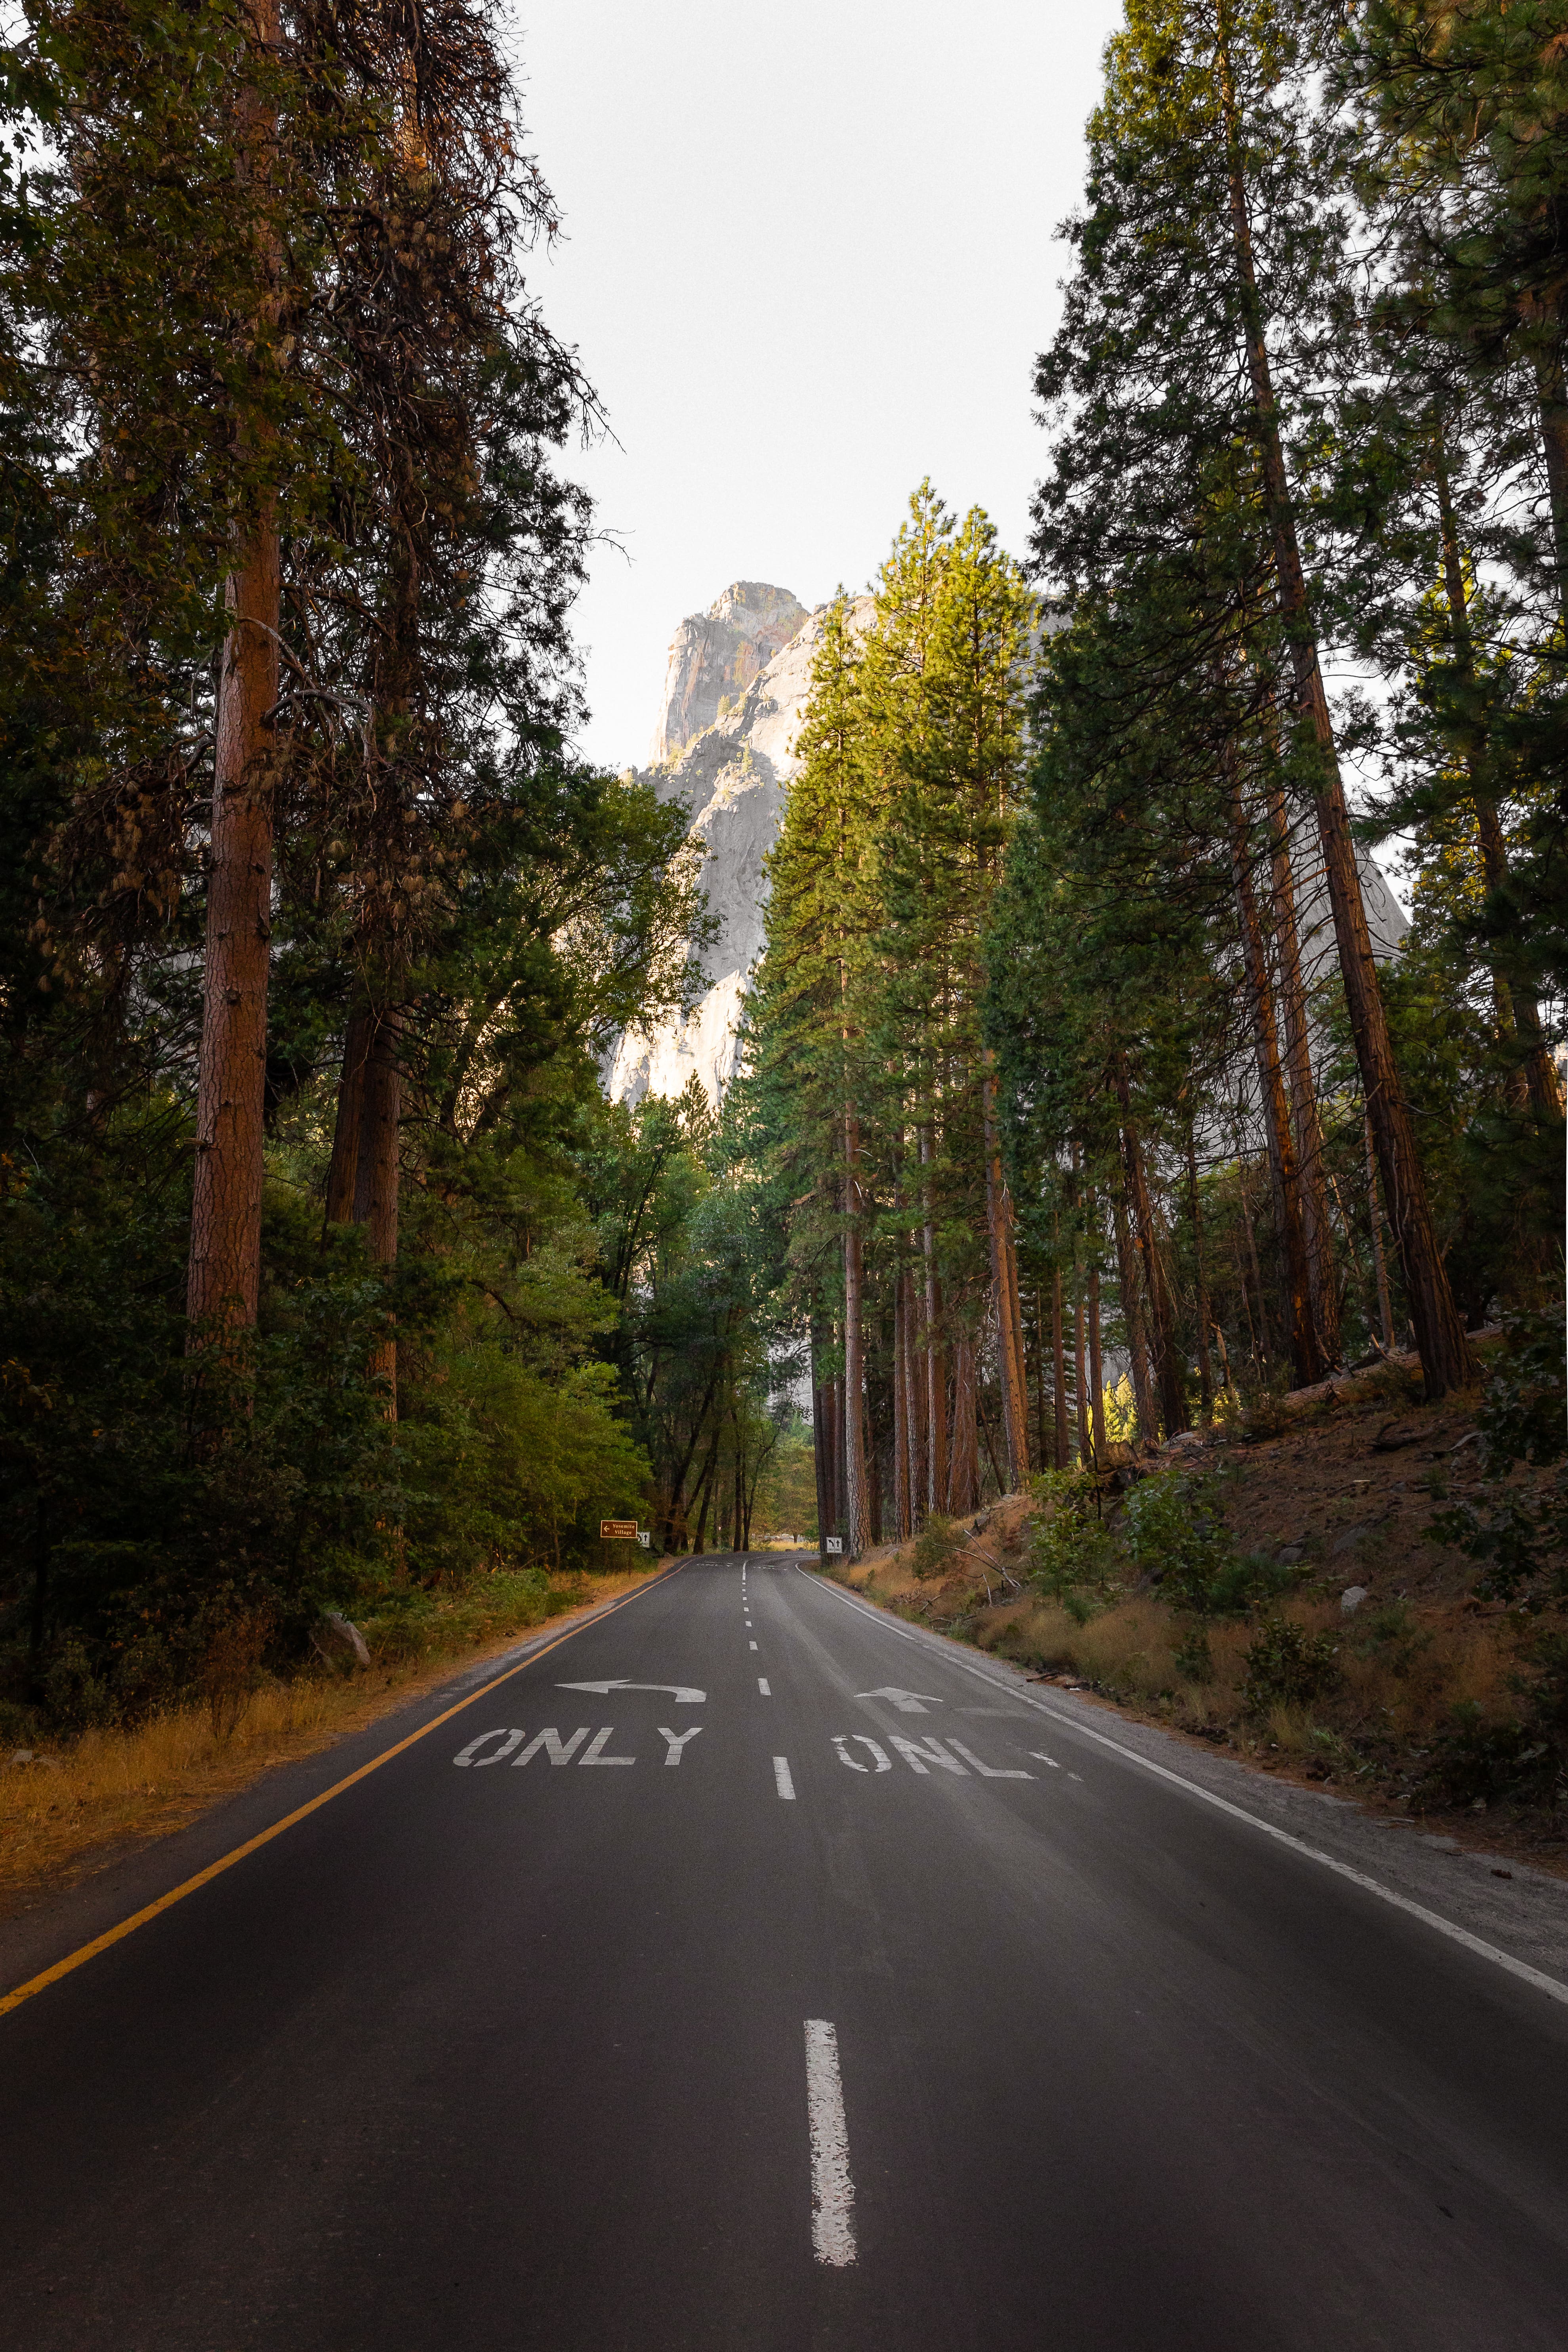 Sunrise on a road leading to a mountain in Yosemite